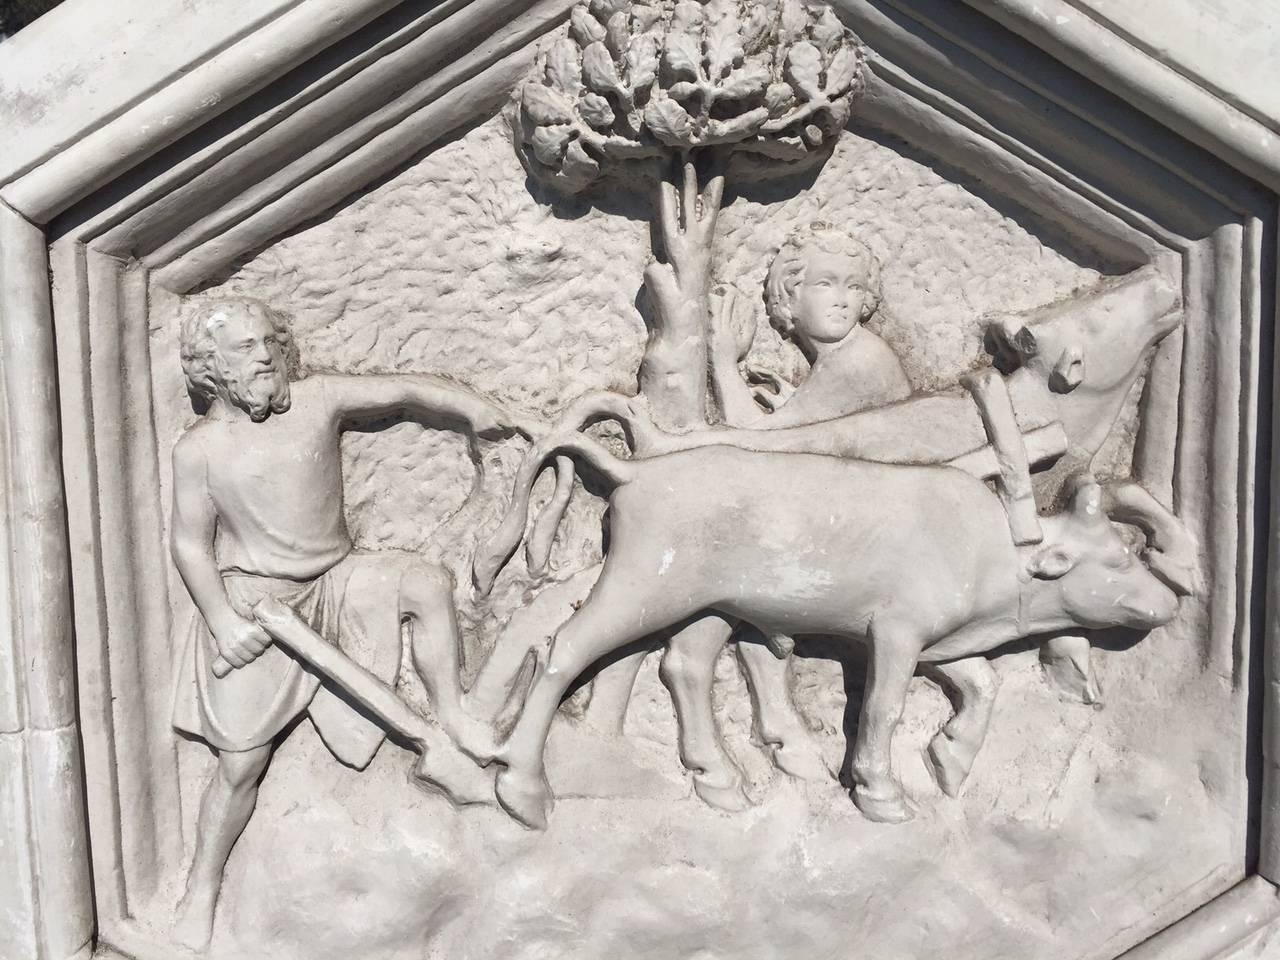 Bucolic bas relief plaster sculpture from a Belgian castle bought in Avignon, France. Measures: 33 ¼” in diameter and 4 ½” deep. It is plaster and depicts a man and boy plowing the fields with cattle.